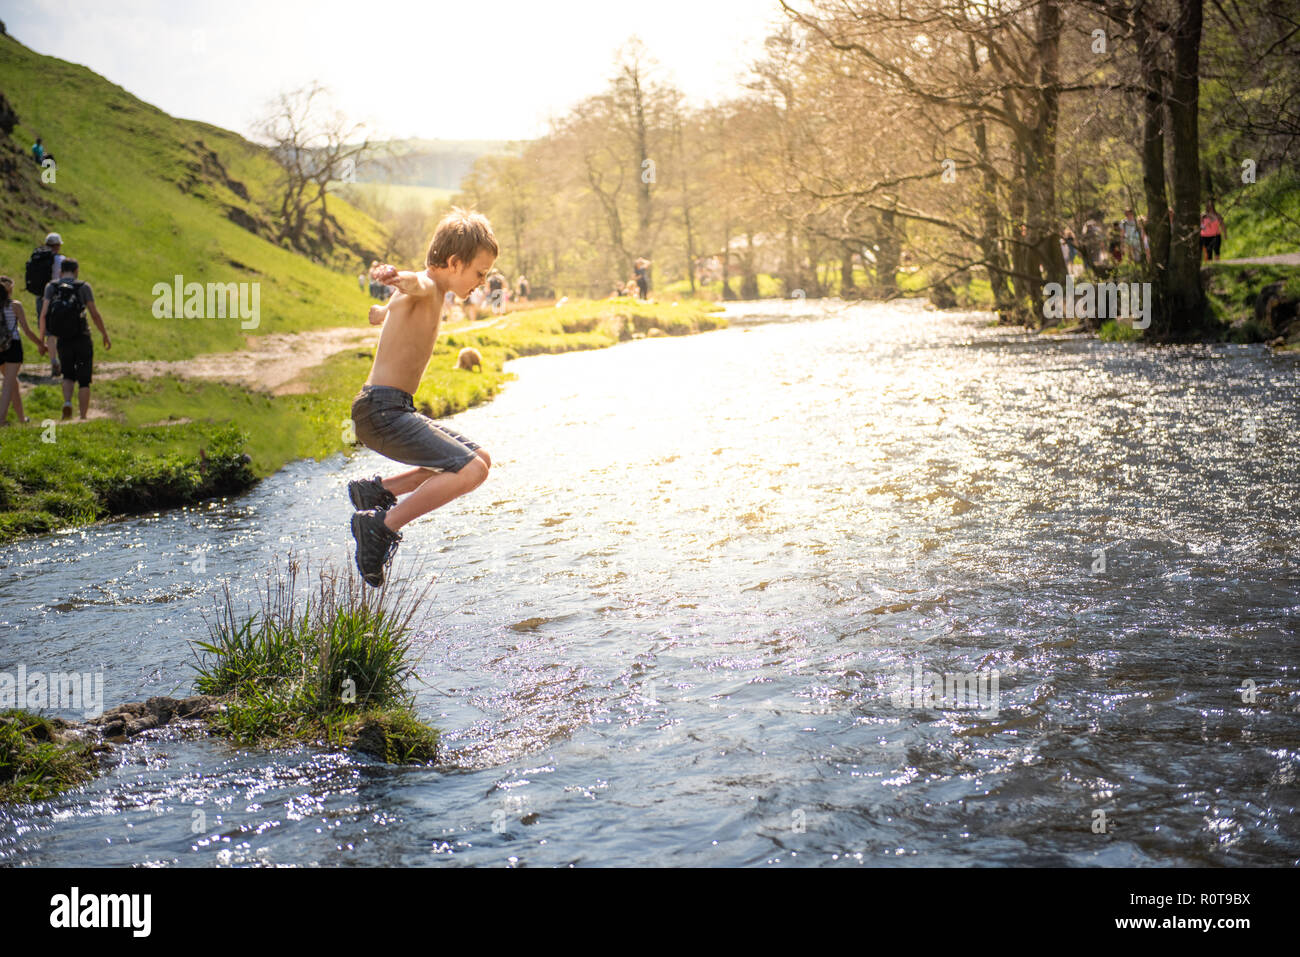 A little boy with ADHD, Autism, Aspergers Syndrome jumps into the river Dove at Dovedale on a hot summers day in denim shorts and hiking boots Stock Photo